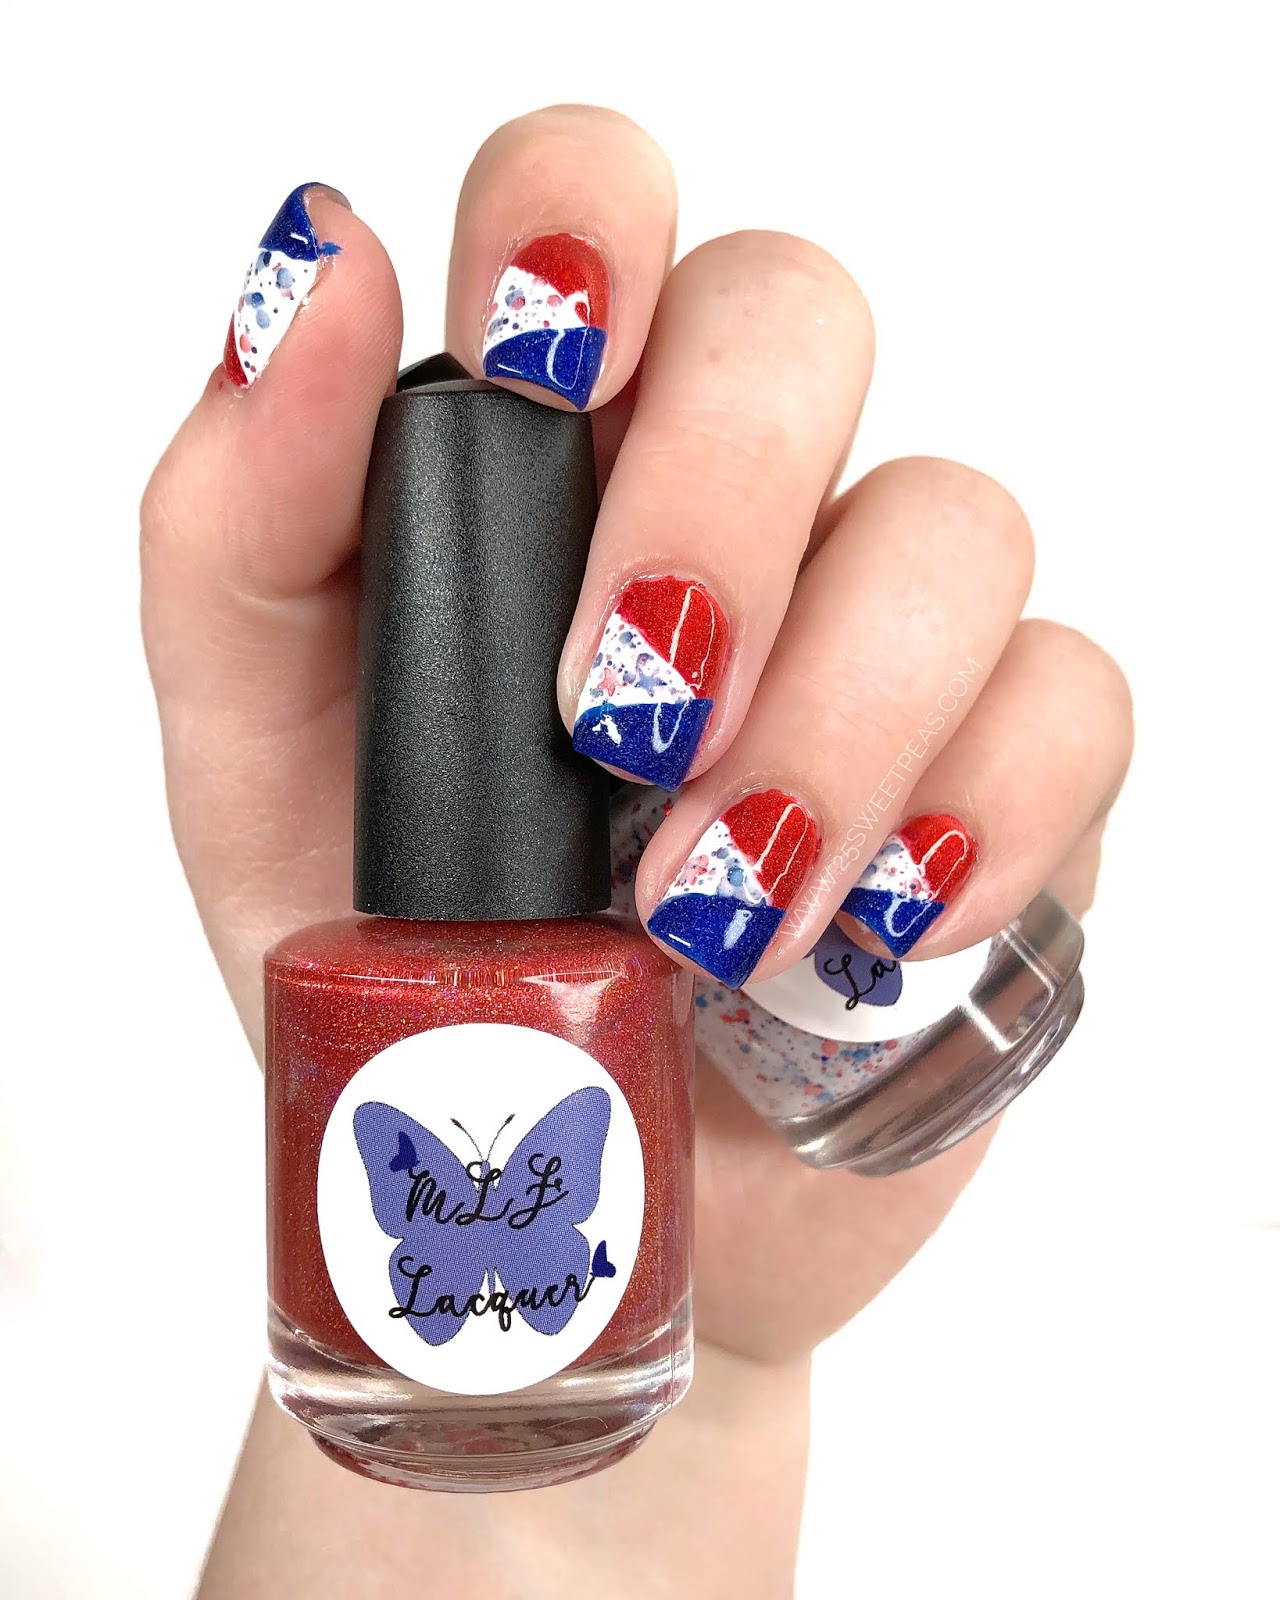 Celebrate 4th of July with Minimalistic Nails - No Design Needed